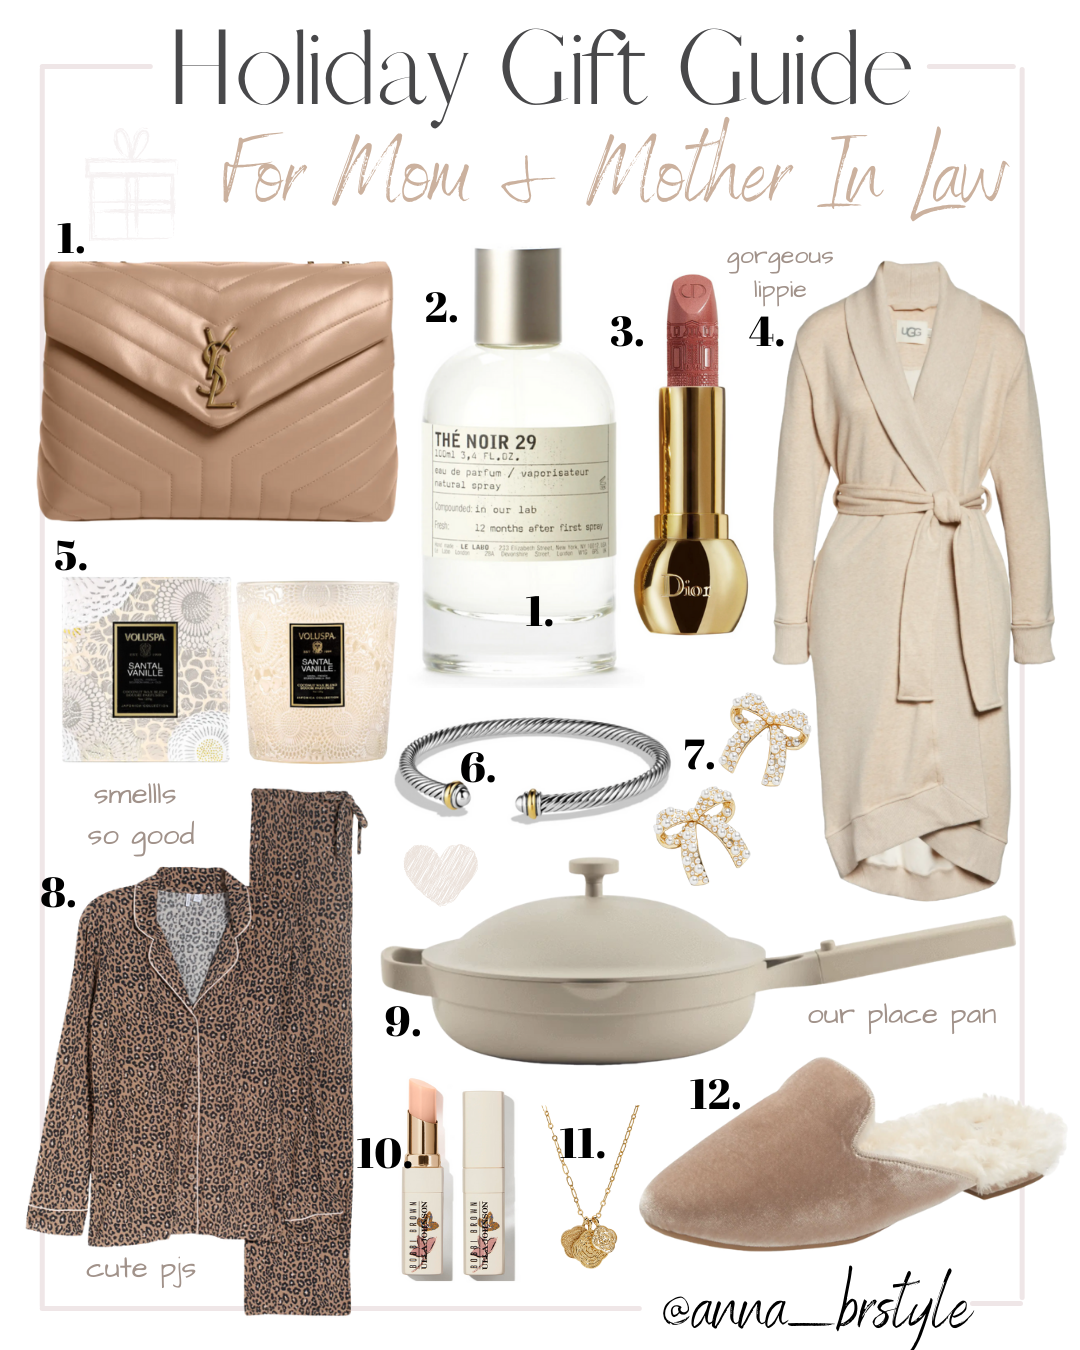 Gifts For: Mom & MIL, The Hostess and The Beauty Lover